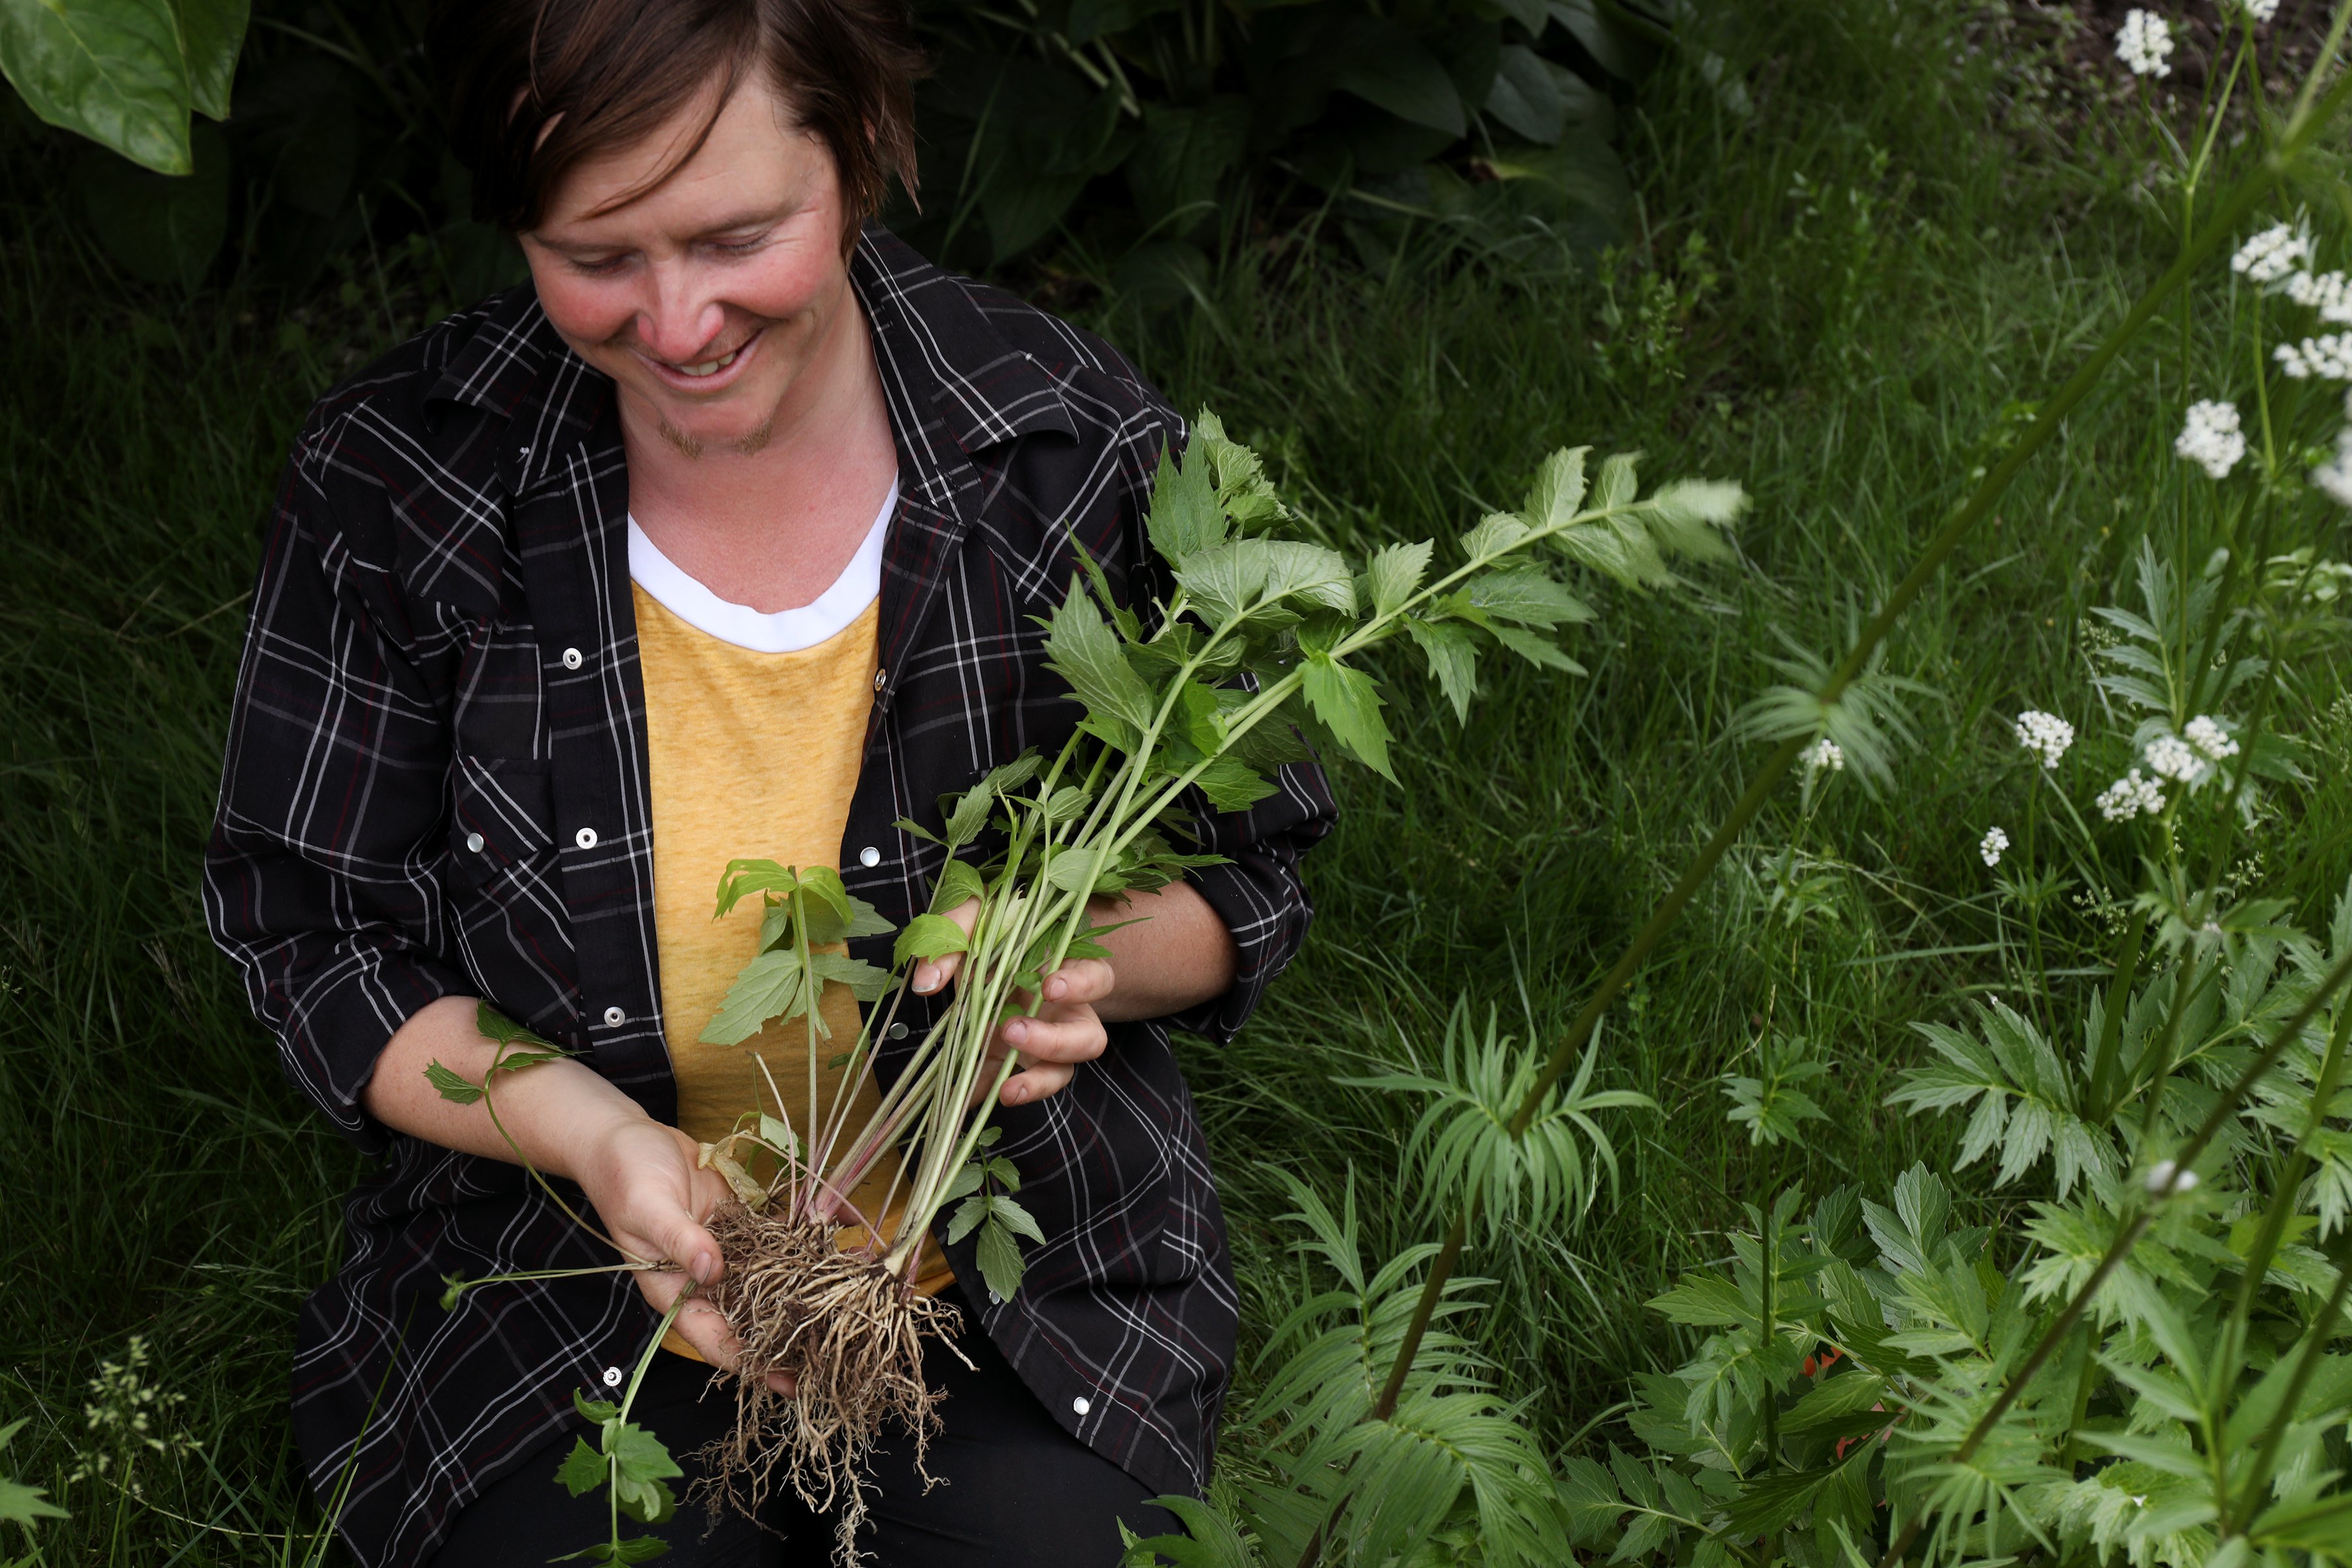 Plant biologist, Heron Brae, identifies botanicals for Mountain Rose Herbs to keep in their herb library for reference material. Here she harvests wild valerian after correctly identifying the species. 